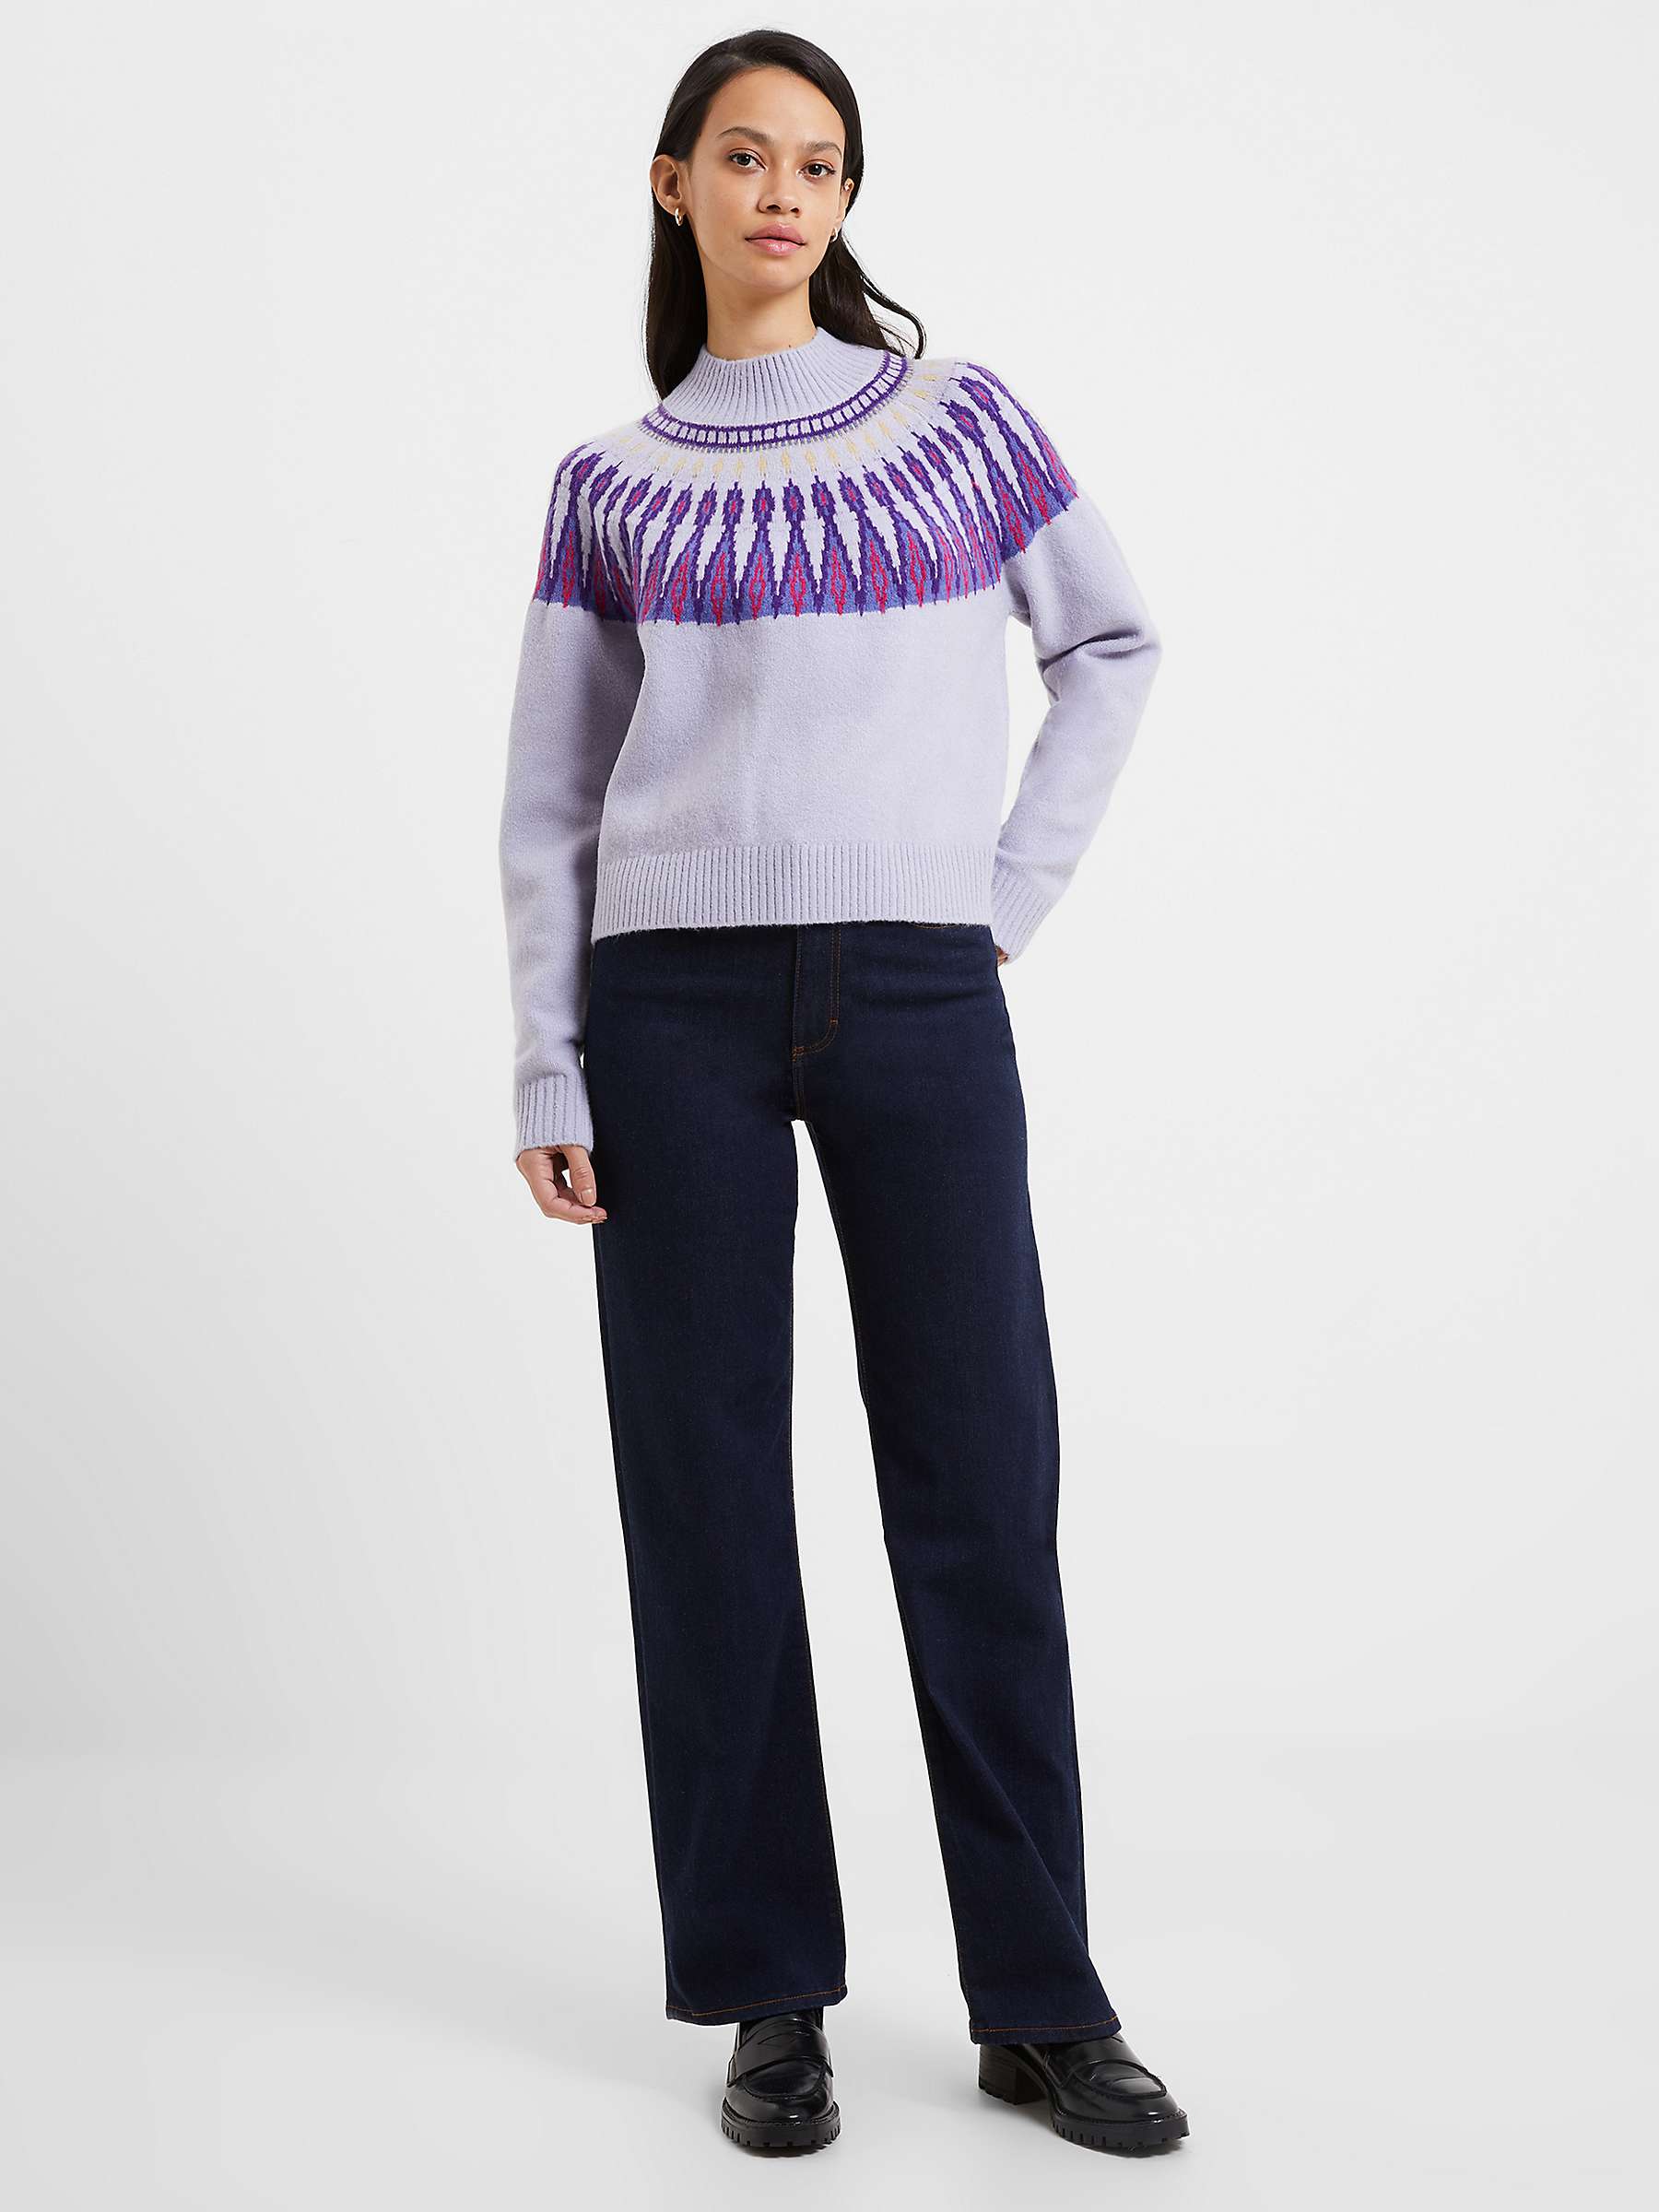 Buy French Connection Jolee Fair Isle Cotton Blend Jumper, Cosmic Sky Online at johnlewis.com